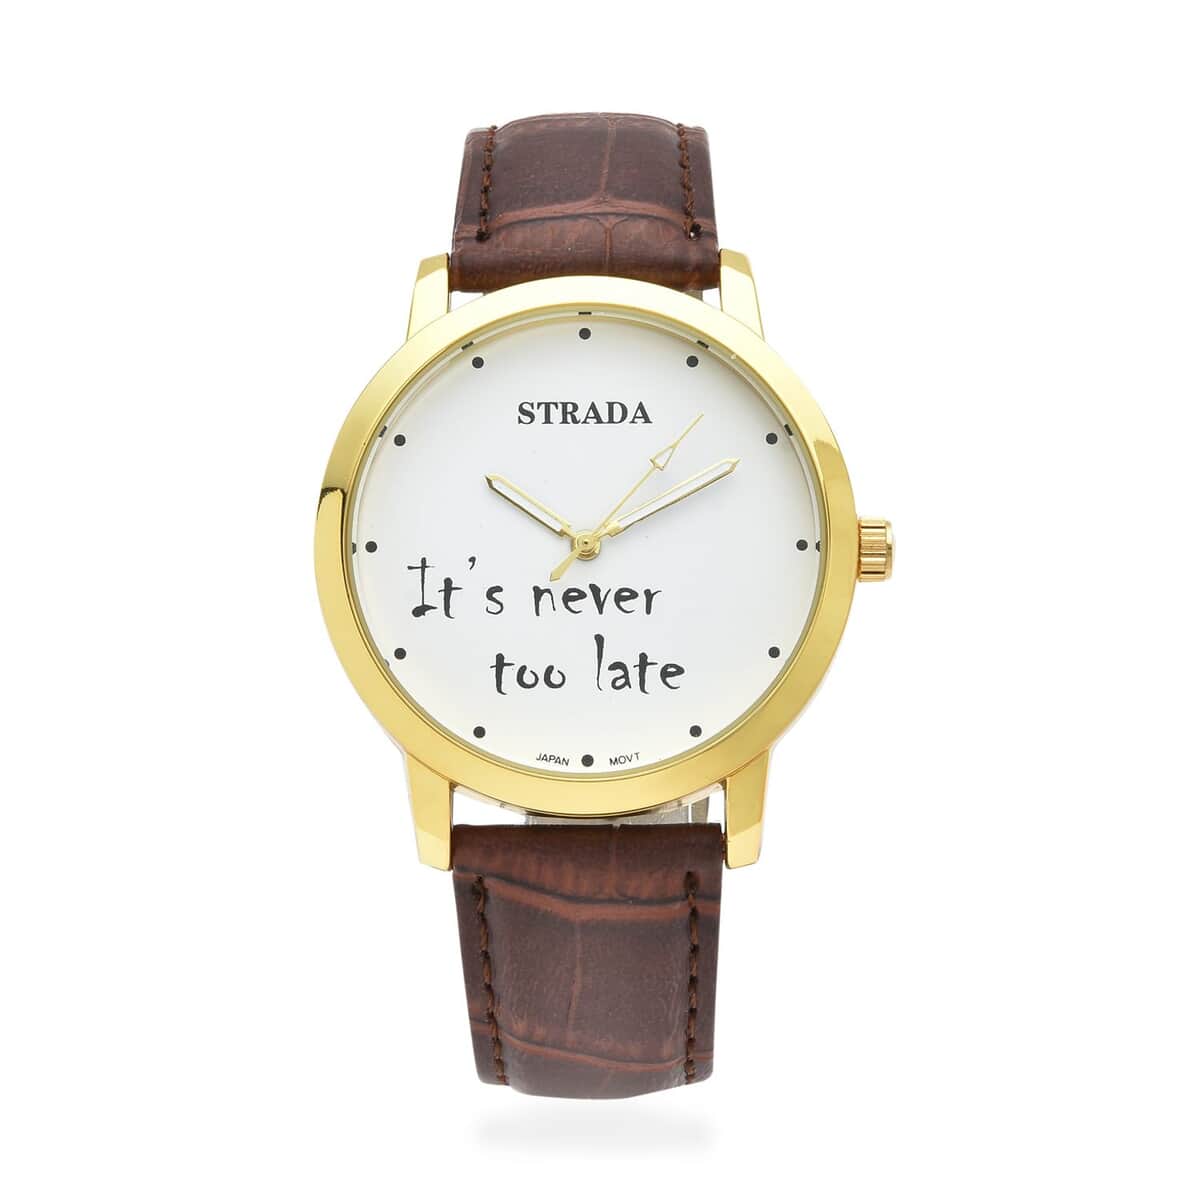 Strada Japanese Movement It's Never Too Late Dial Watch with Brown Faux Leather Strap (40.38mm) (7.5-9.0 Inch) image number 0